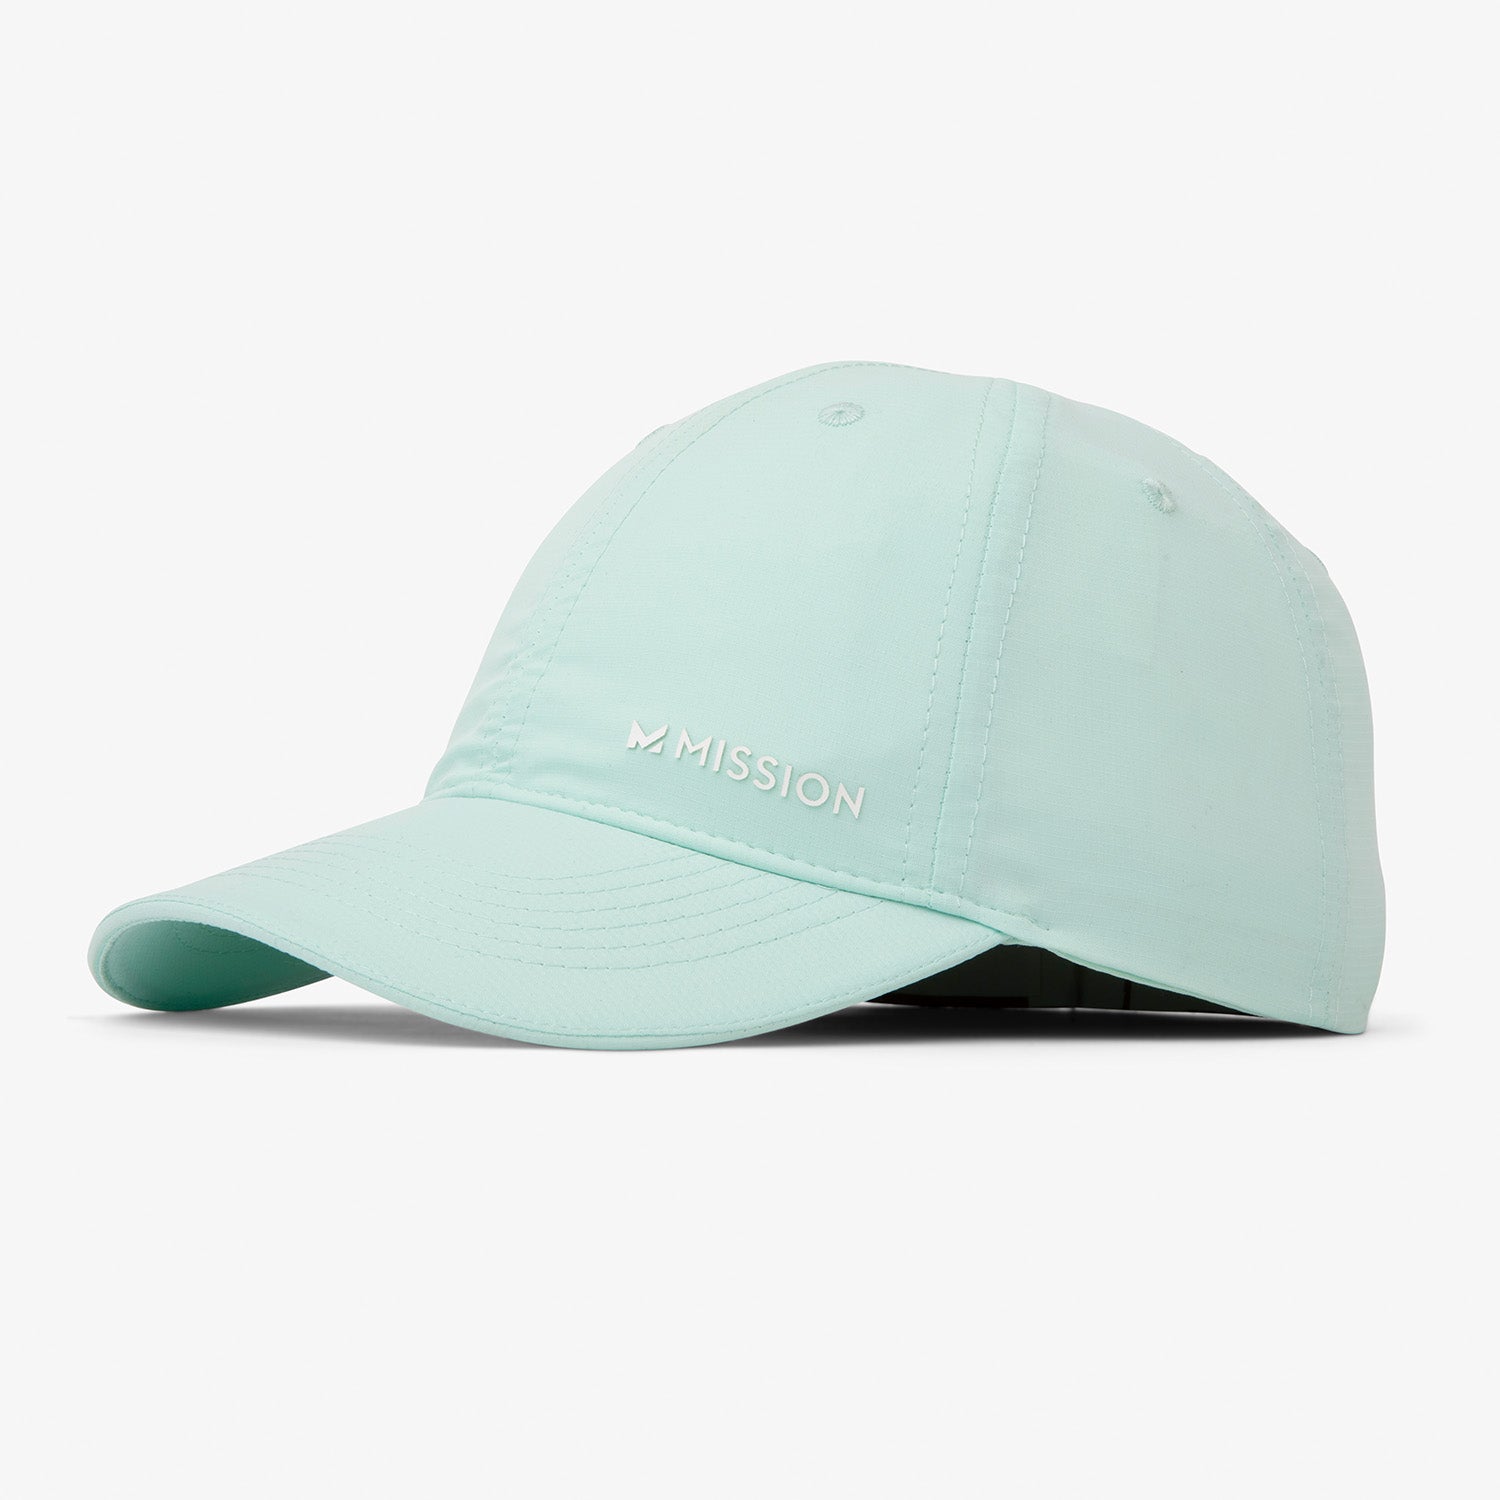 Cooling Performance Hat Caps MISSION One Size Honeydew 